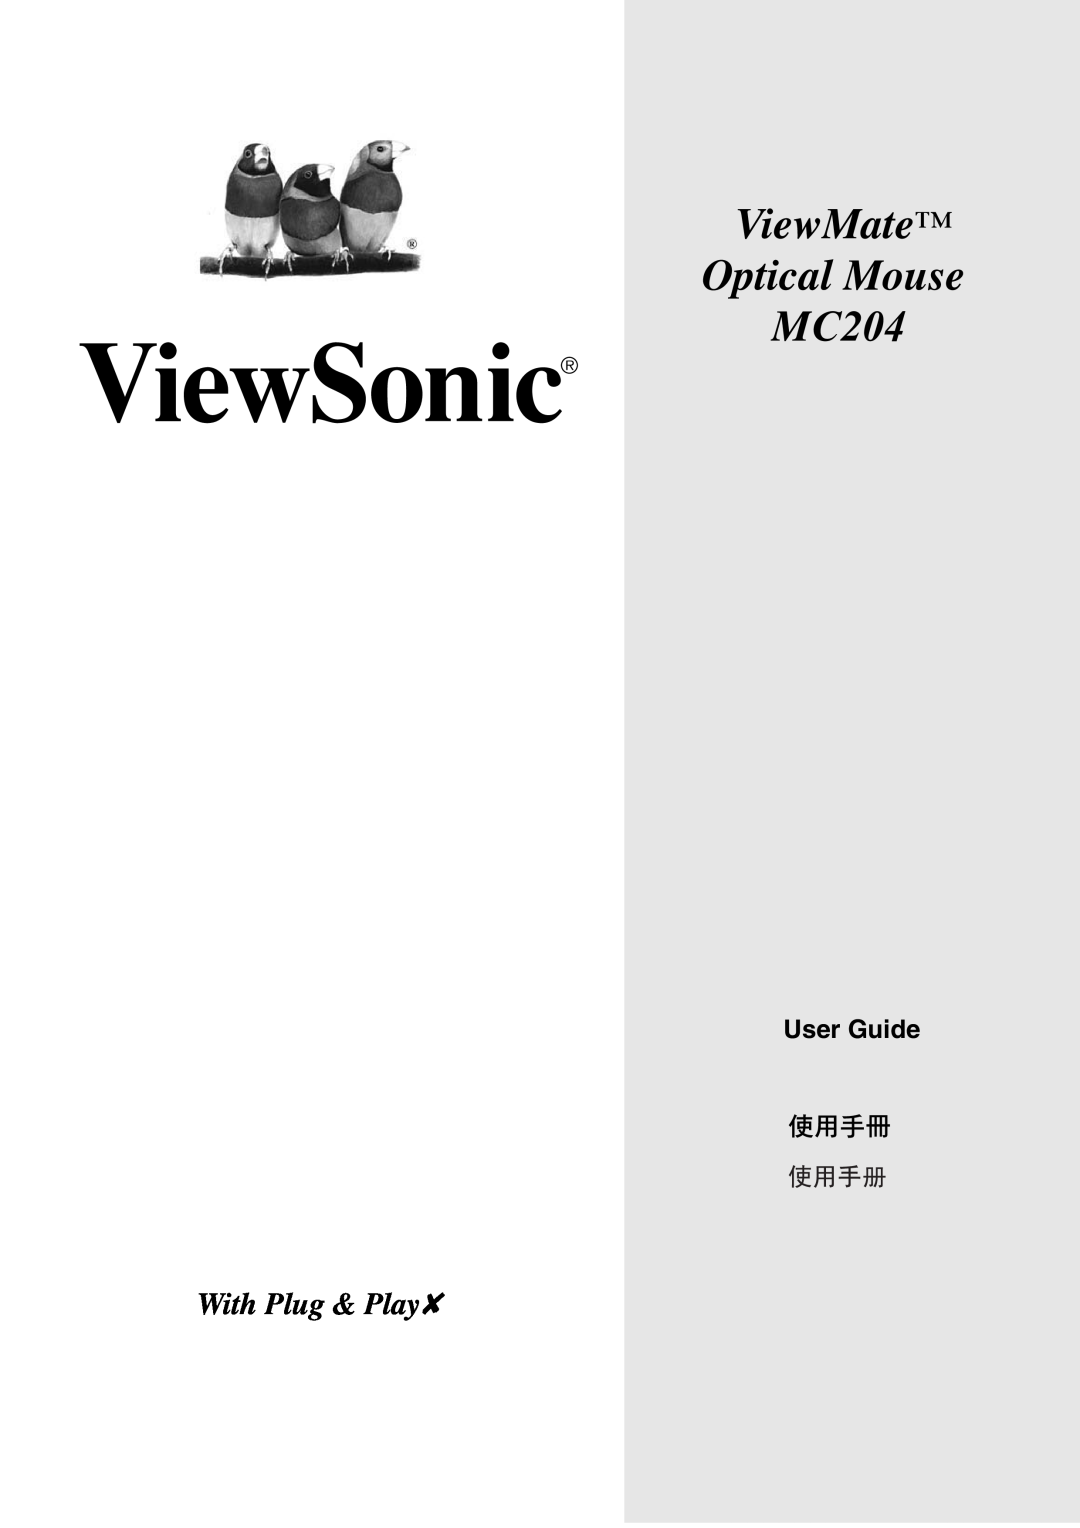 ViewSonic manual User Guide, ViewMate Optical Mouse MC204, With Plug & Play 